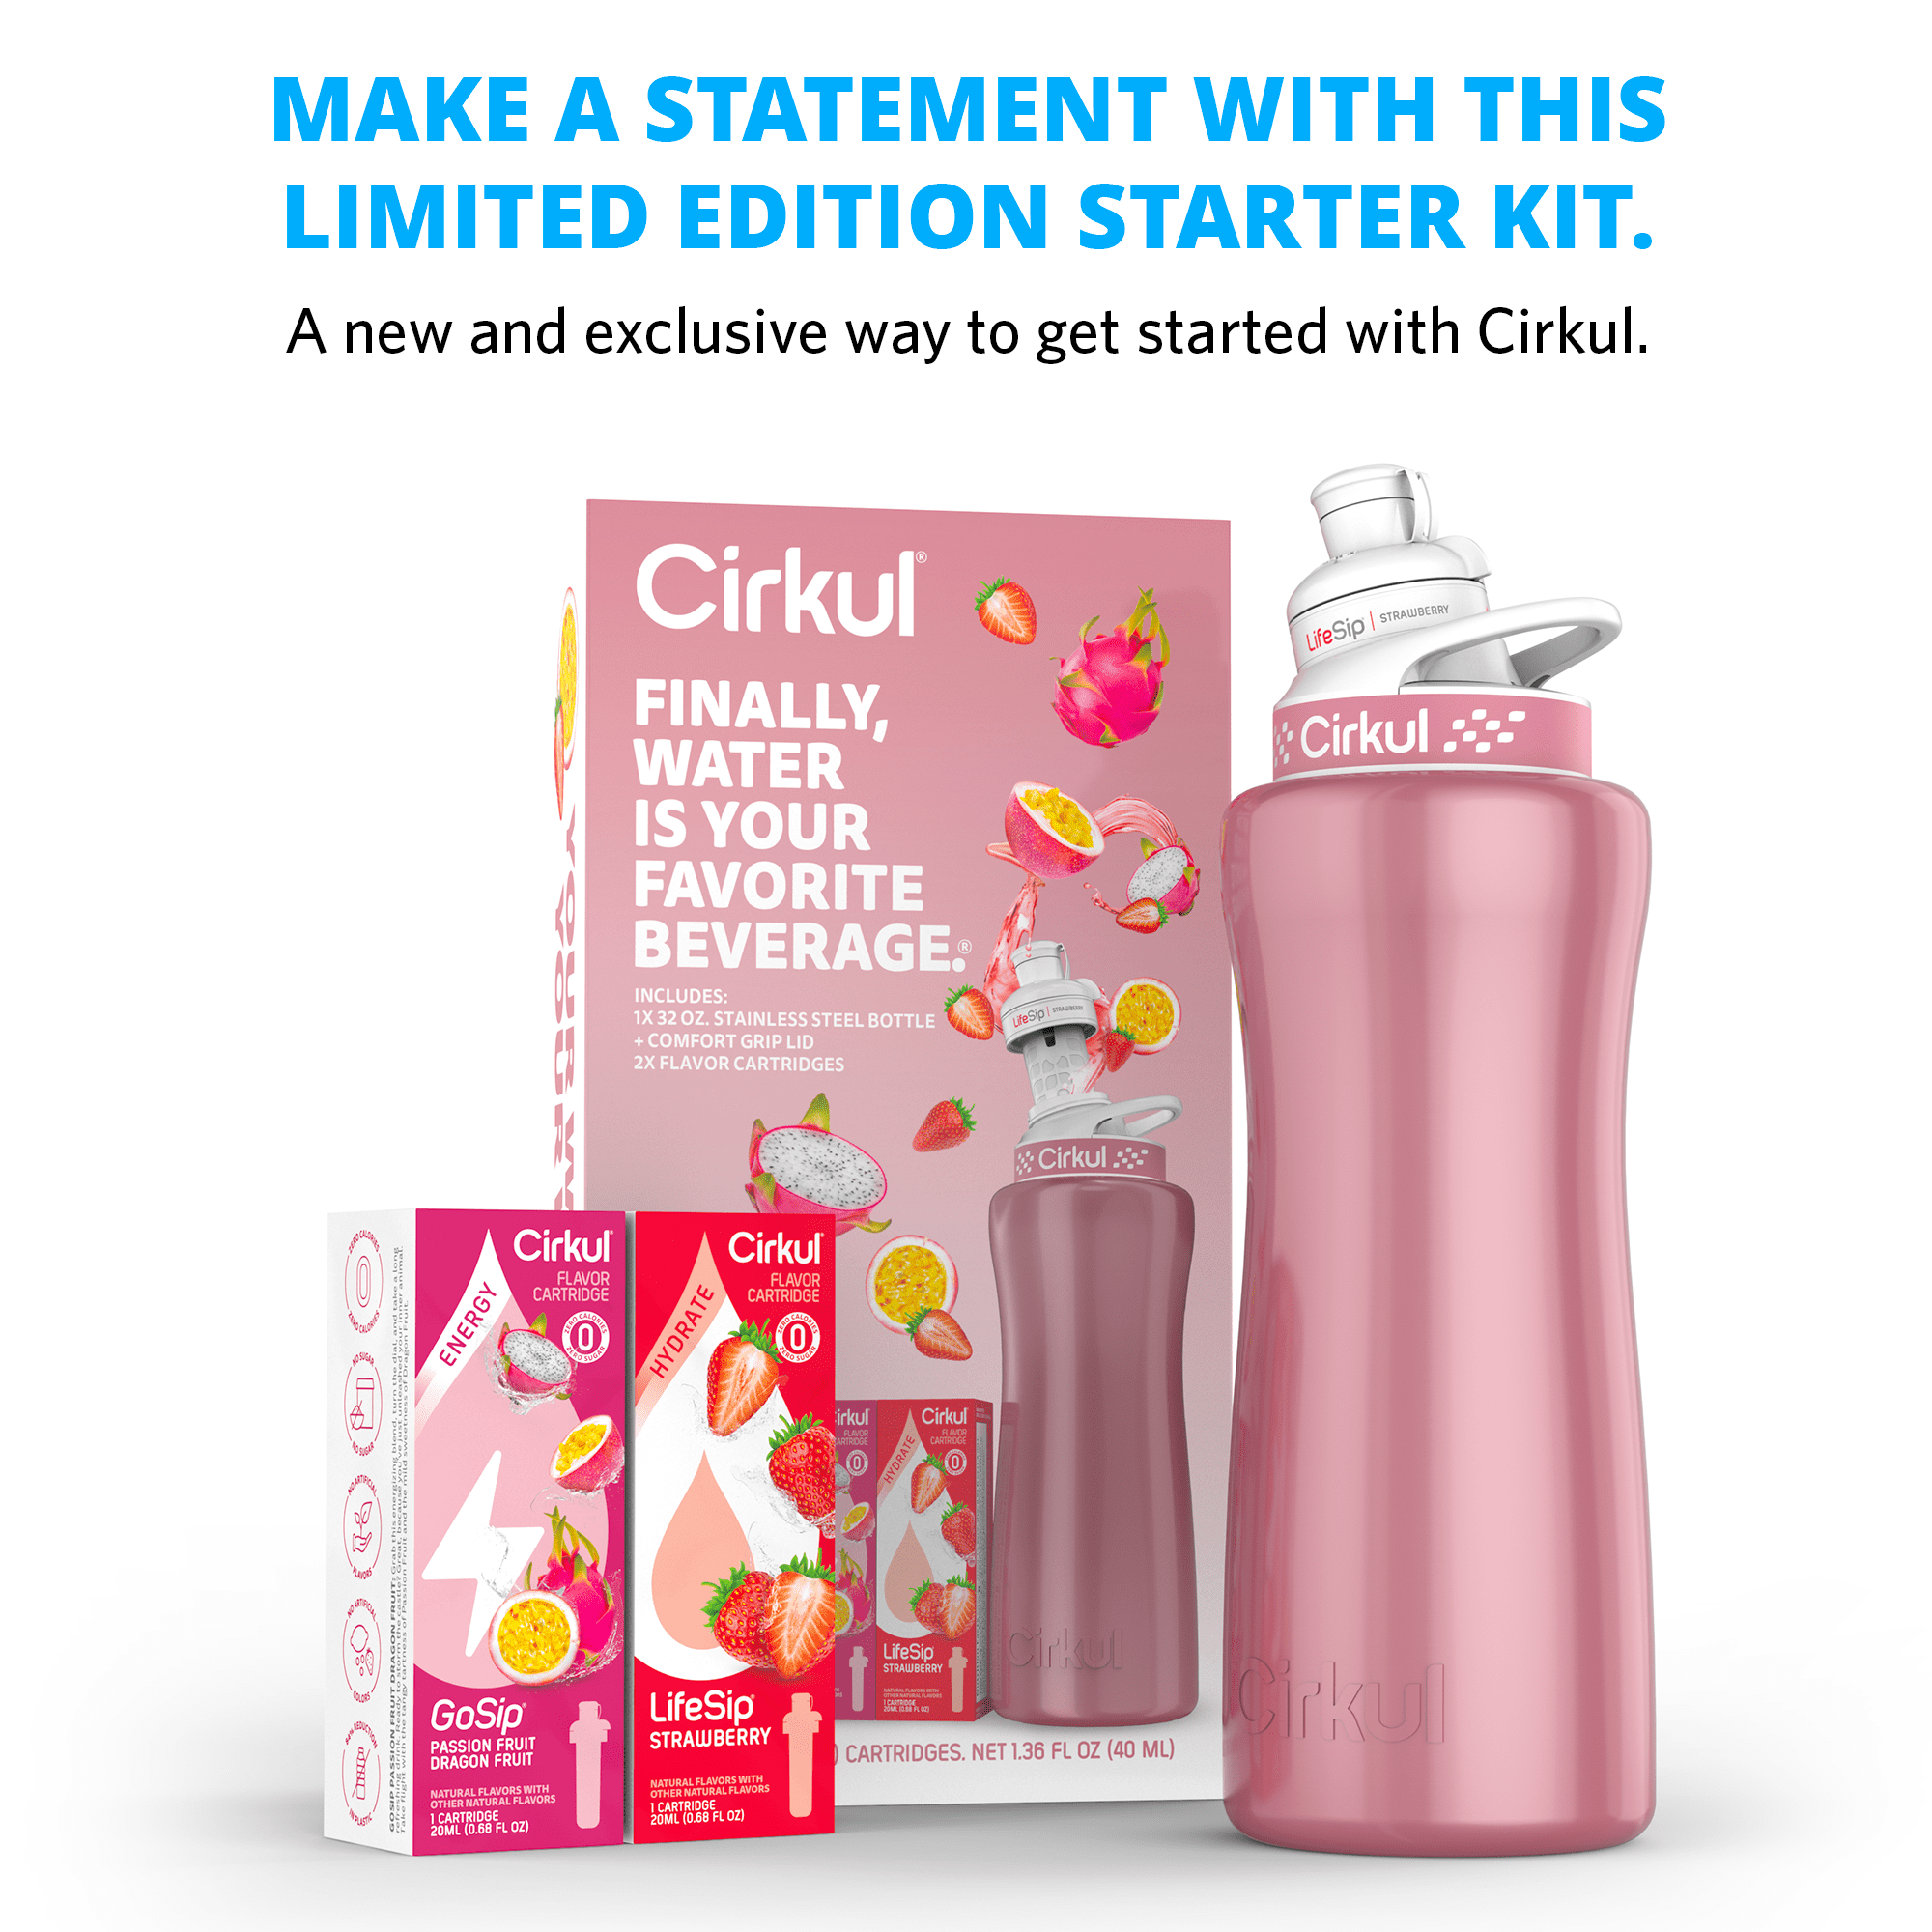 Cirkul 32oz Rose Gold Stainless Steel Water Bottle Starter Kit with Rose  Gold Lid and 2 Flavor Cartridges (Strawberry & Passion Fruit Dragon Fruit)  